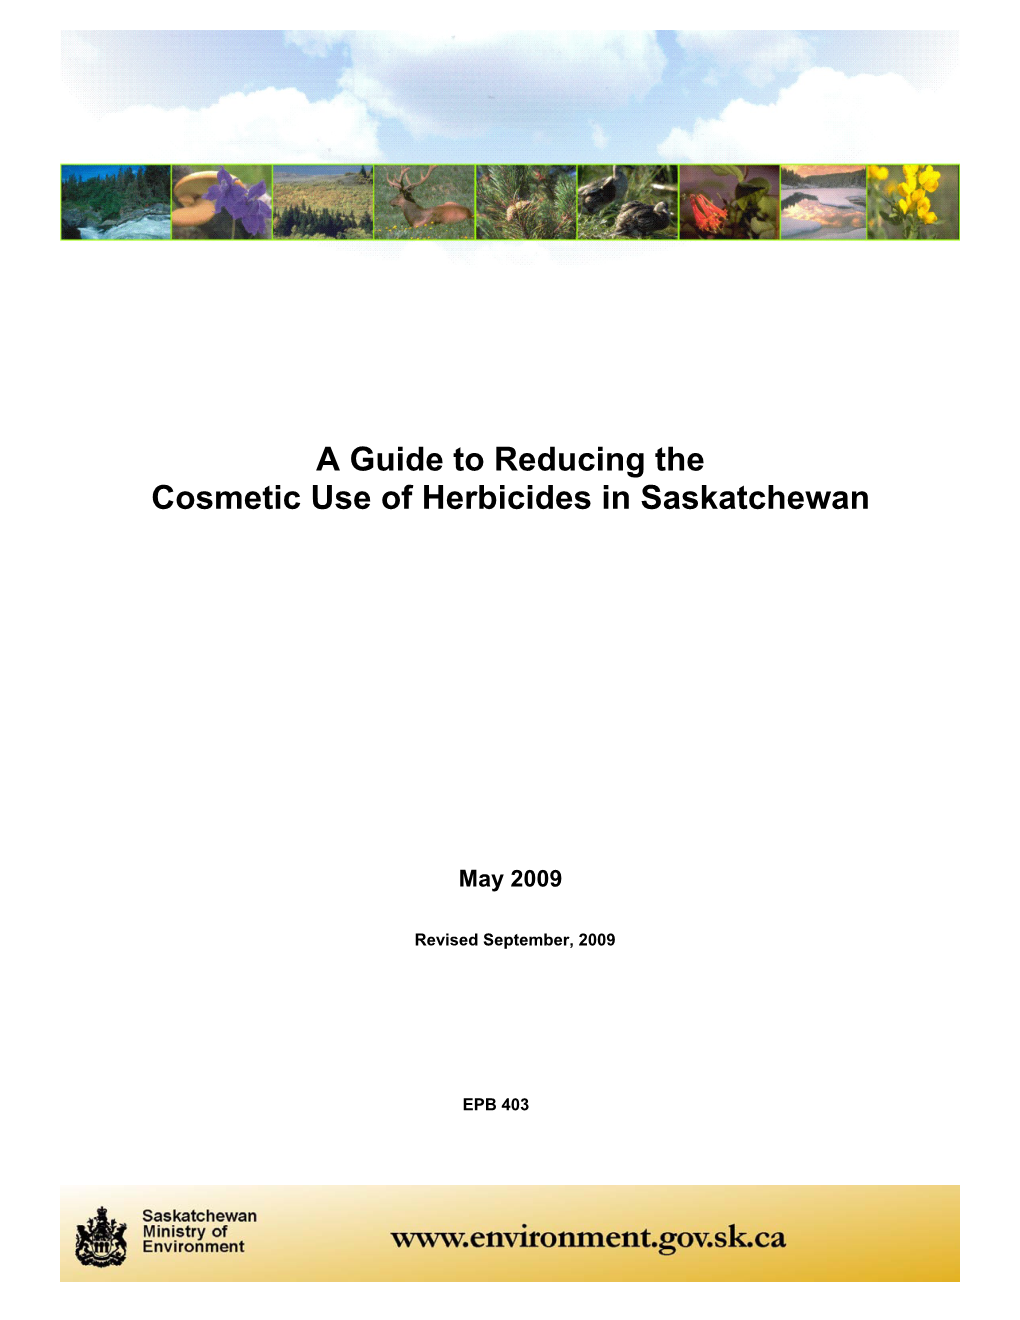 A Guide to Reducing the Cosmetic Use of Herbicides in Saskatchewan